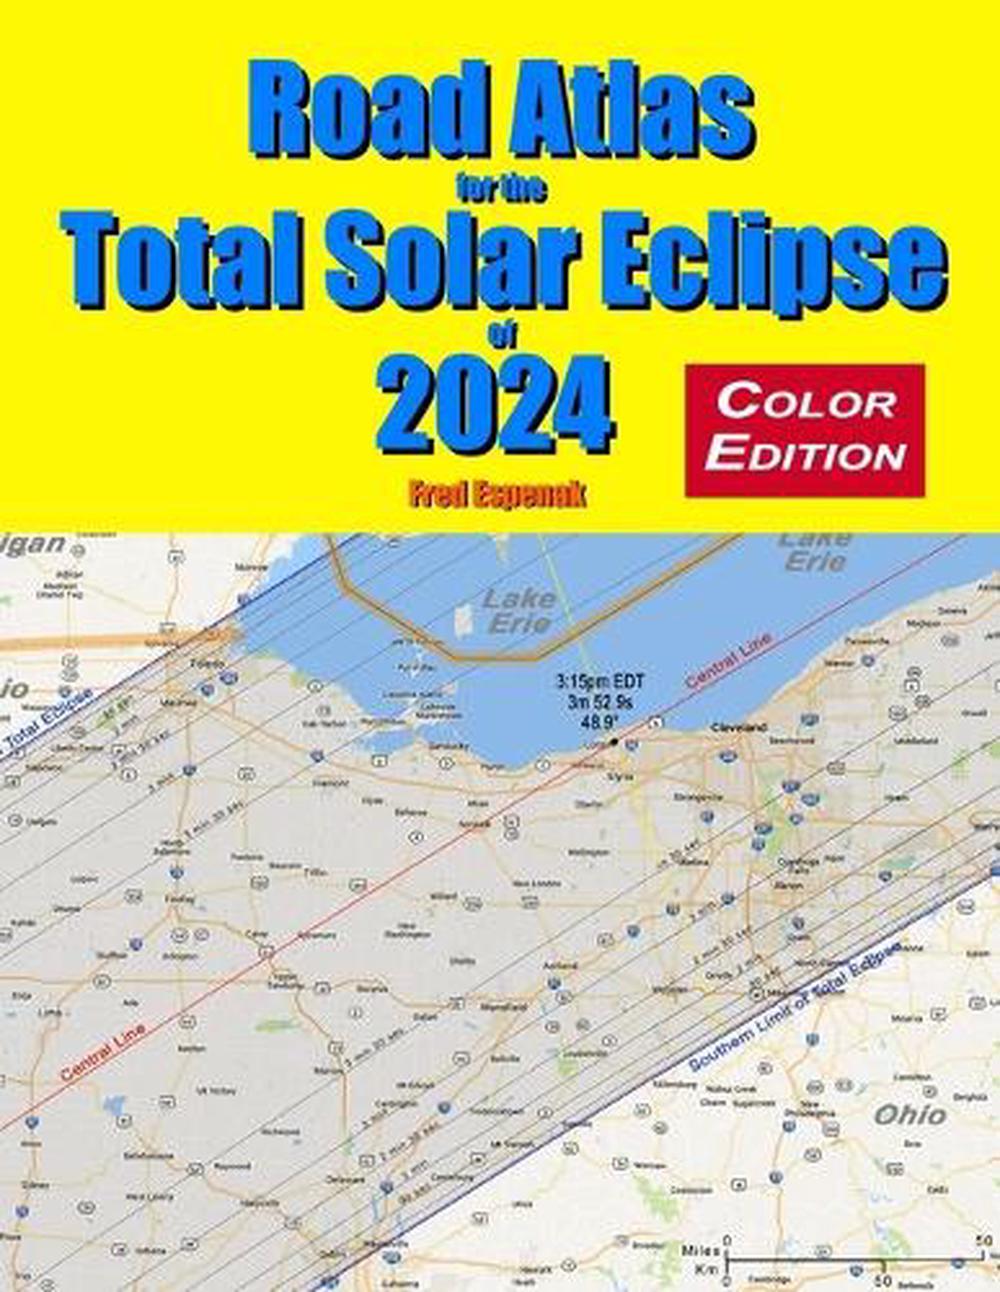 Road Atlas for the Total Solar Eclipse of 2024 Color Edition by Fred